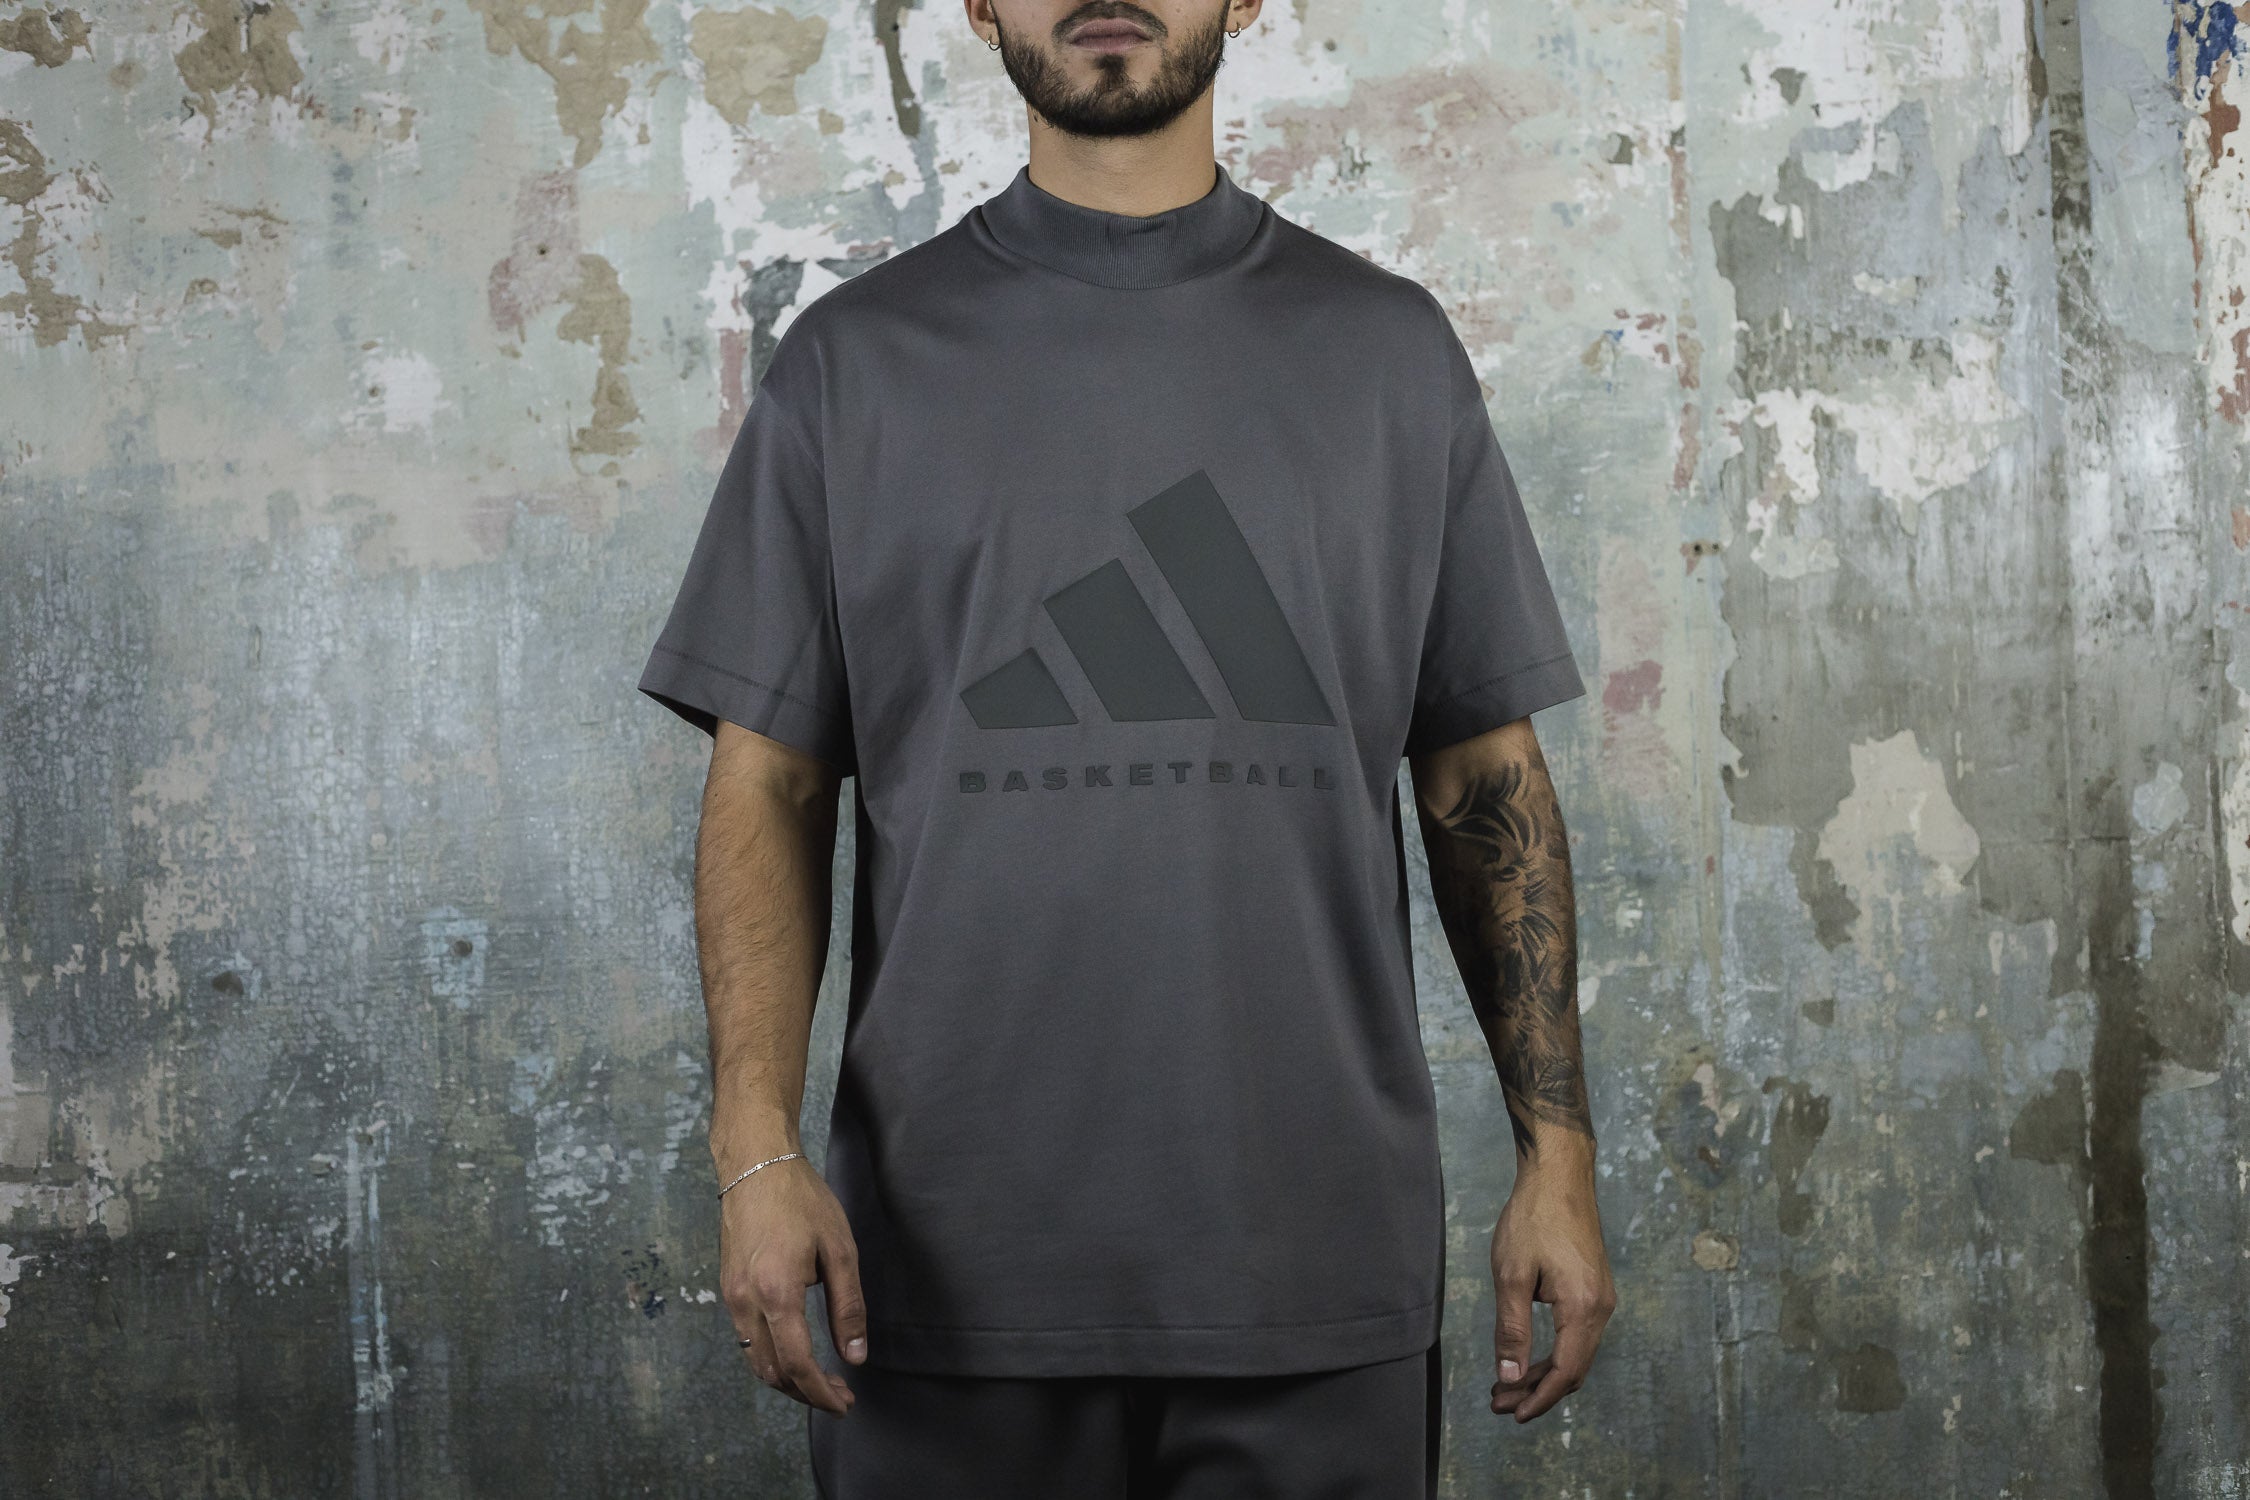 adidas One Basketball Jersey Tee (All Gender)